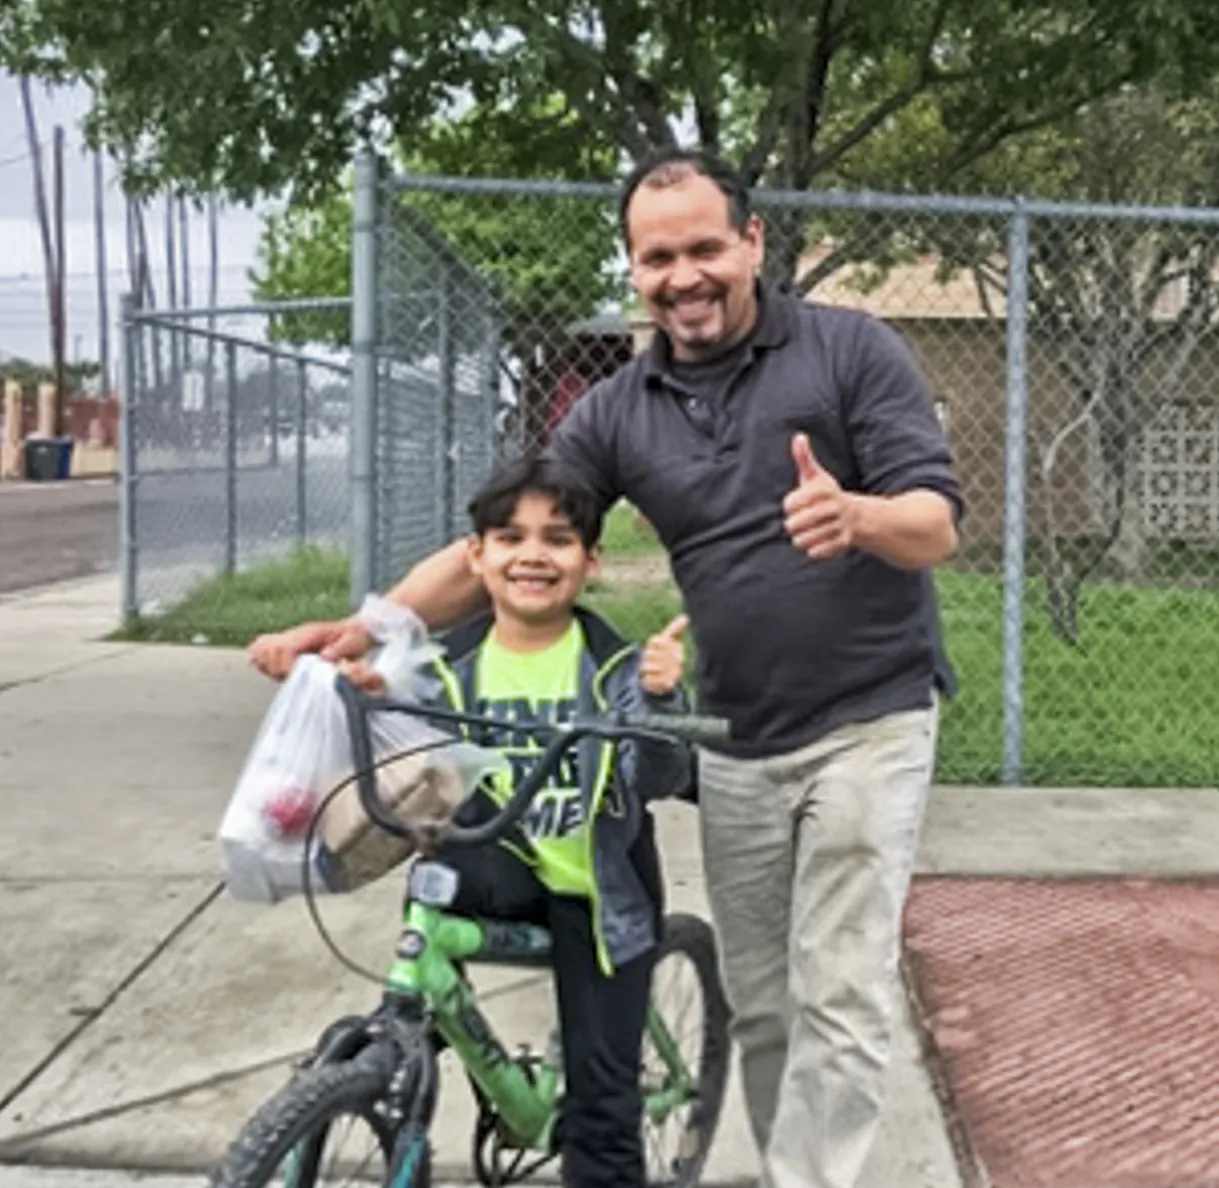 A father and son give thumbs up as they leave a meals site on their bike with a meal bag.